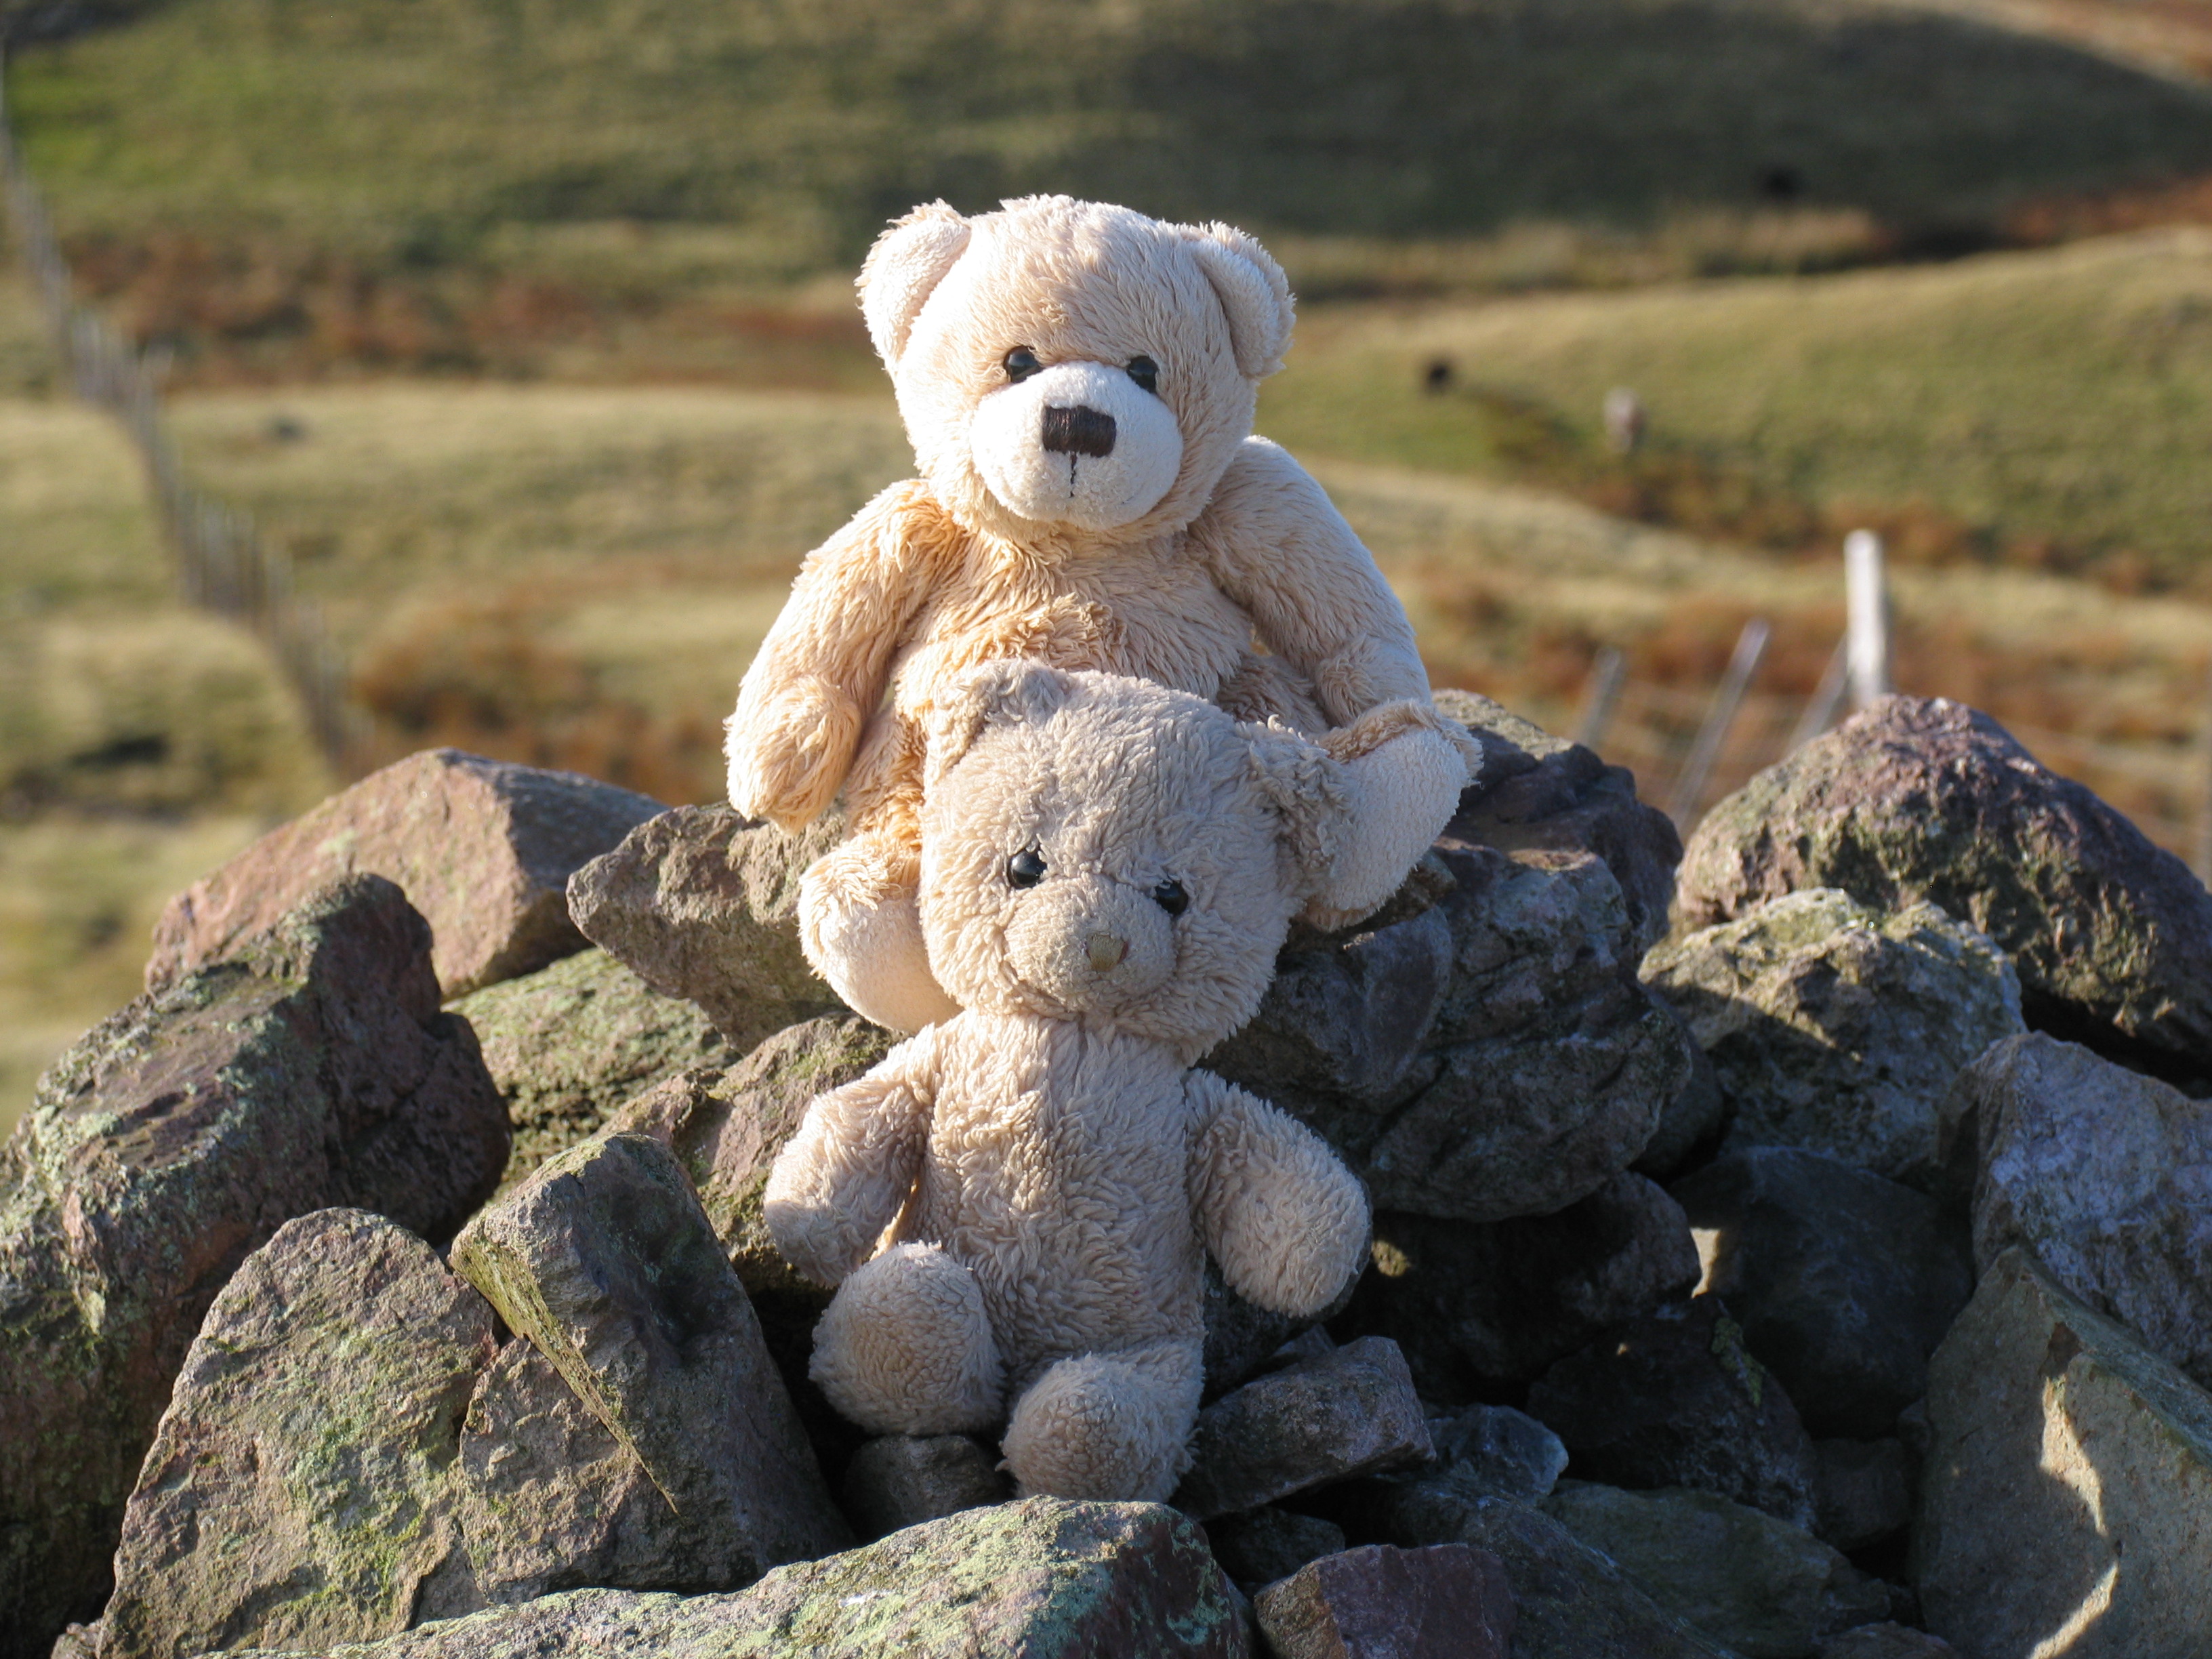 Tommy Ted and Tedster on Steel fell